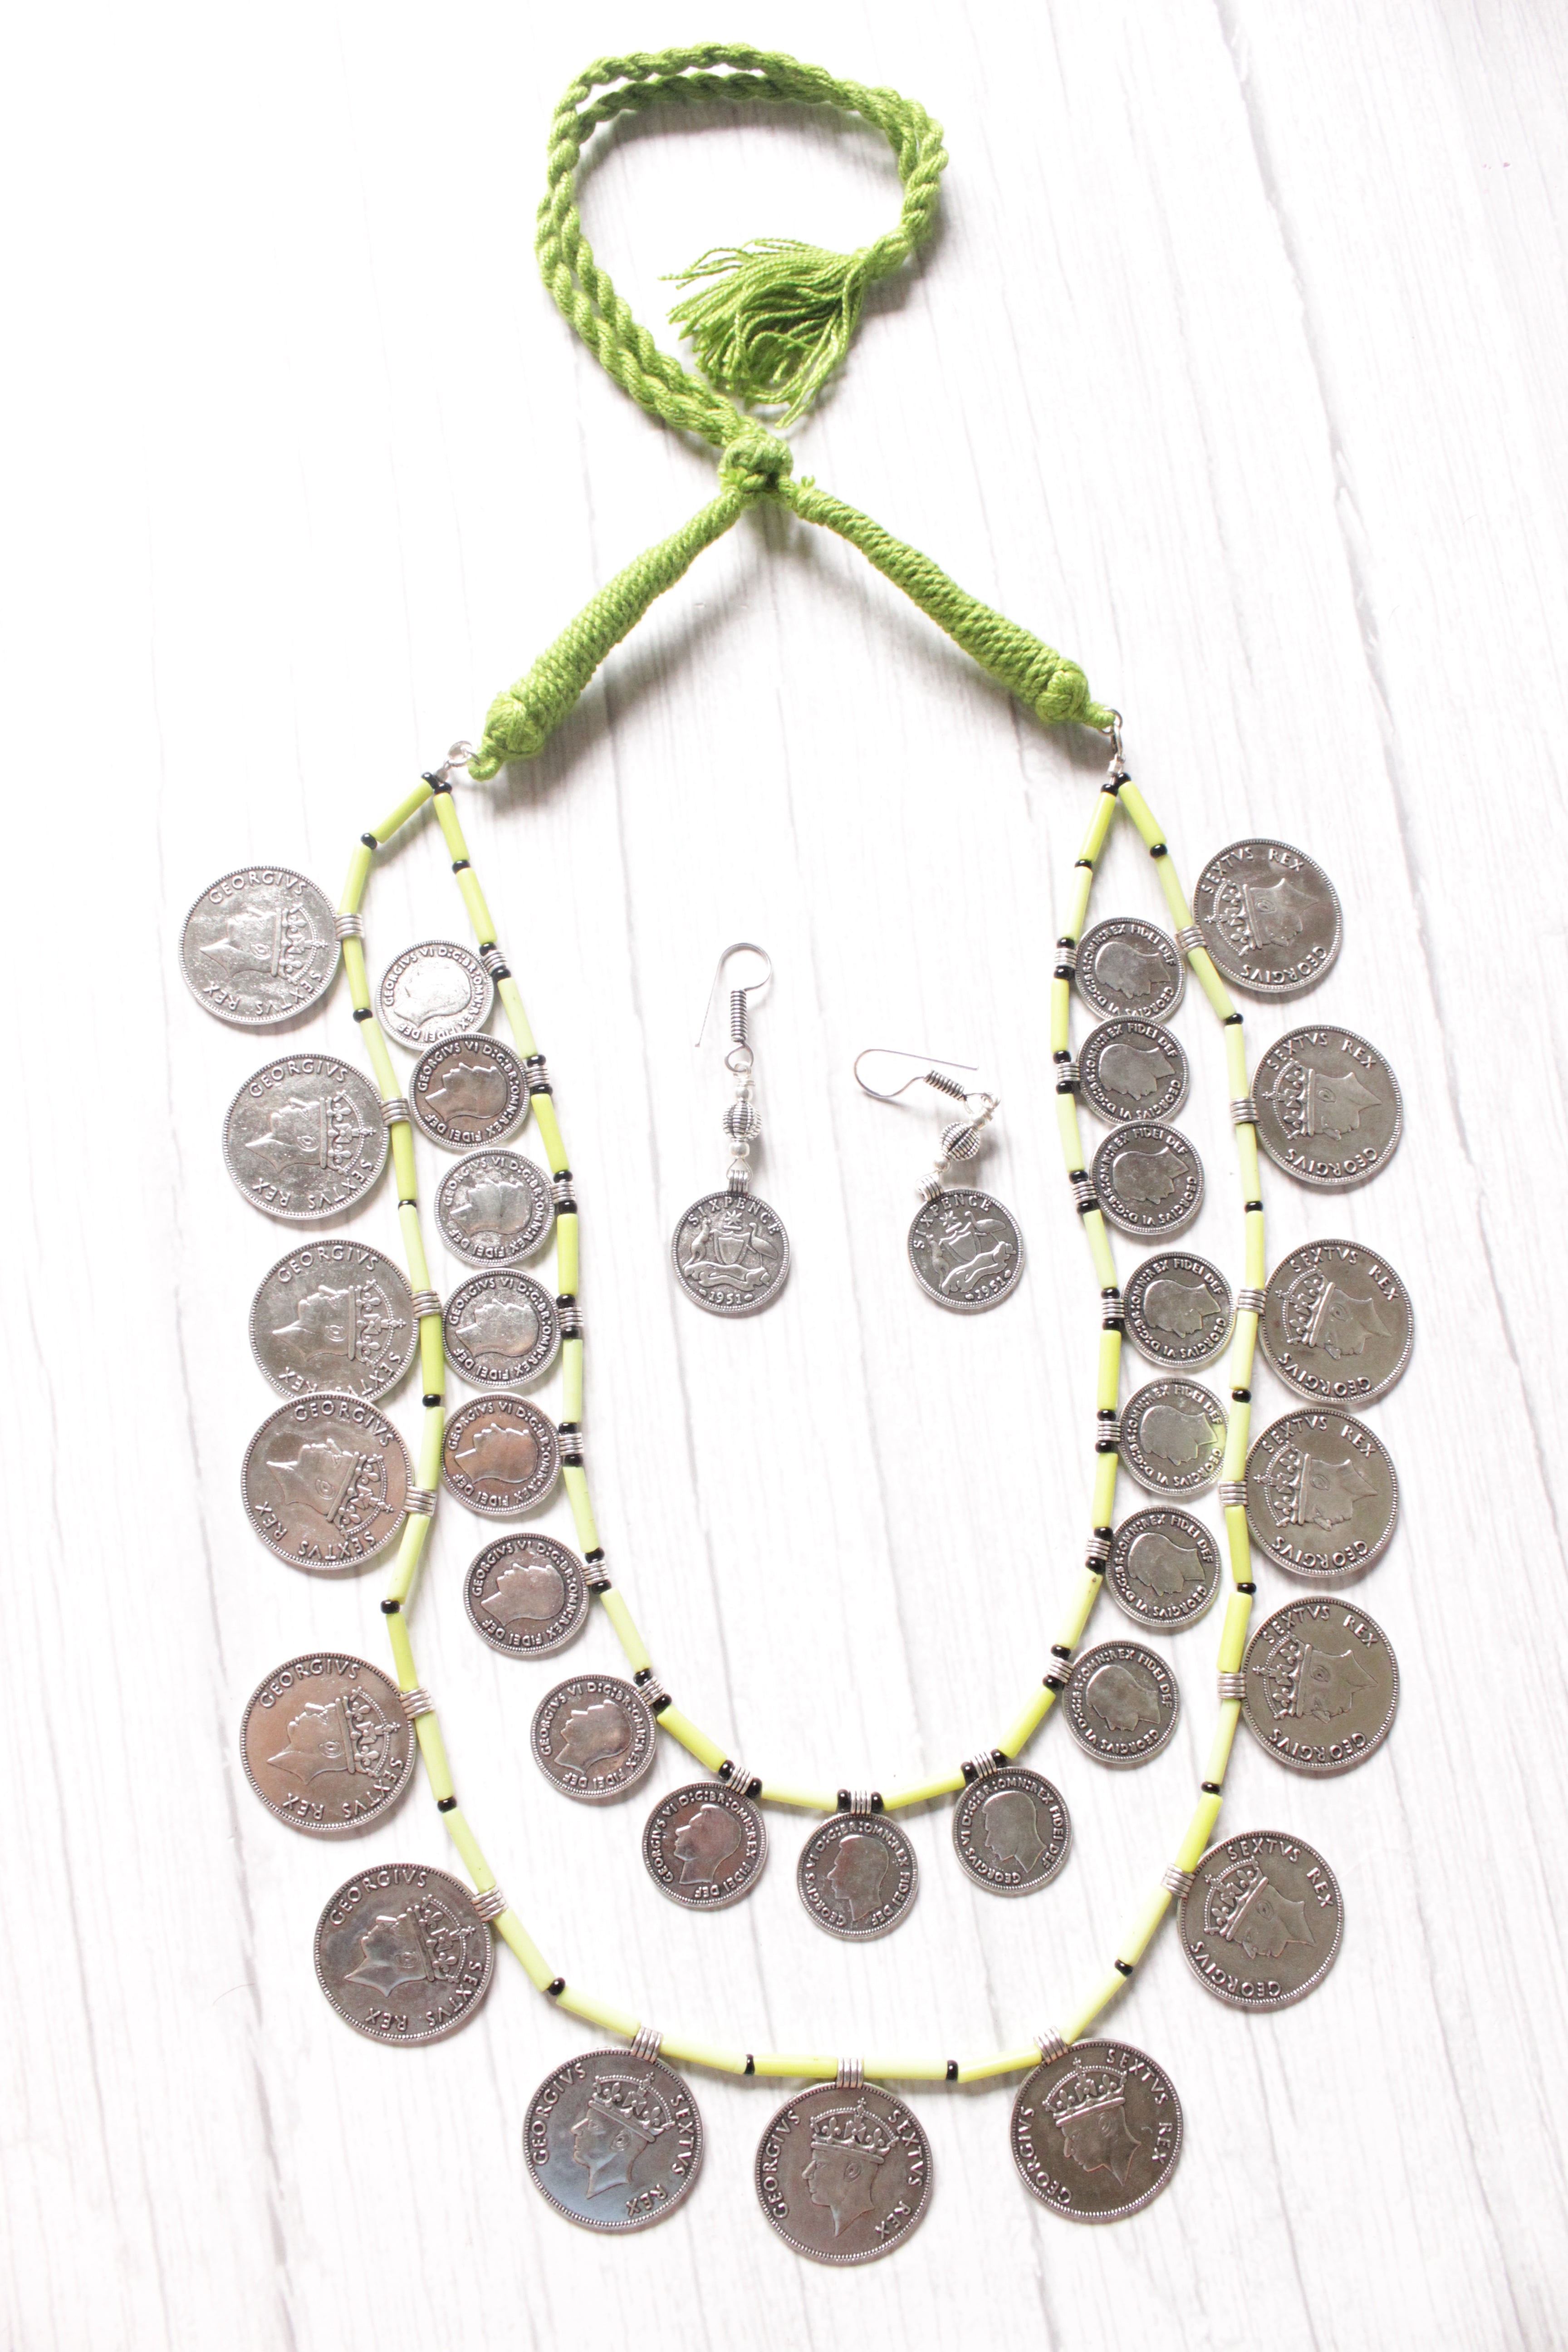 2 Layer Lime Green Beads and Vintage Stamped Metal Coins Braided Necklace Set